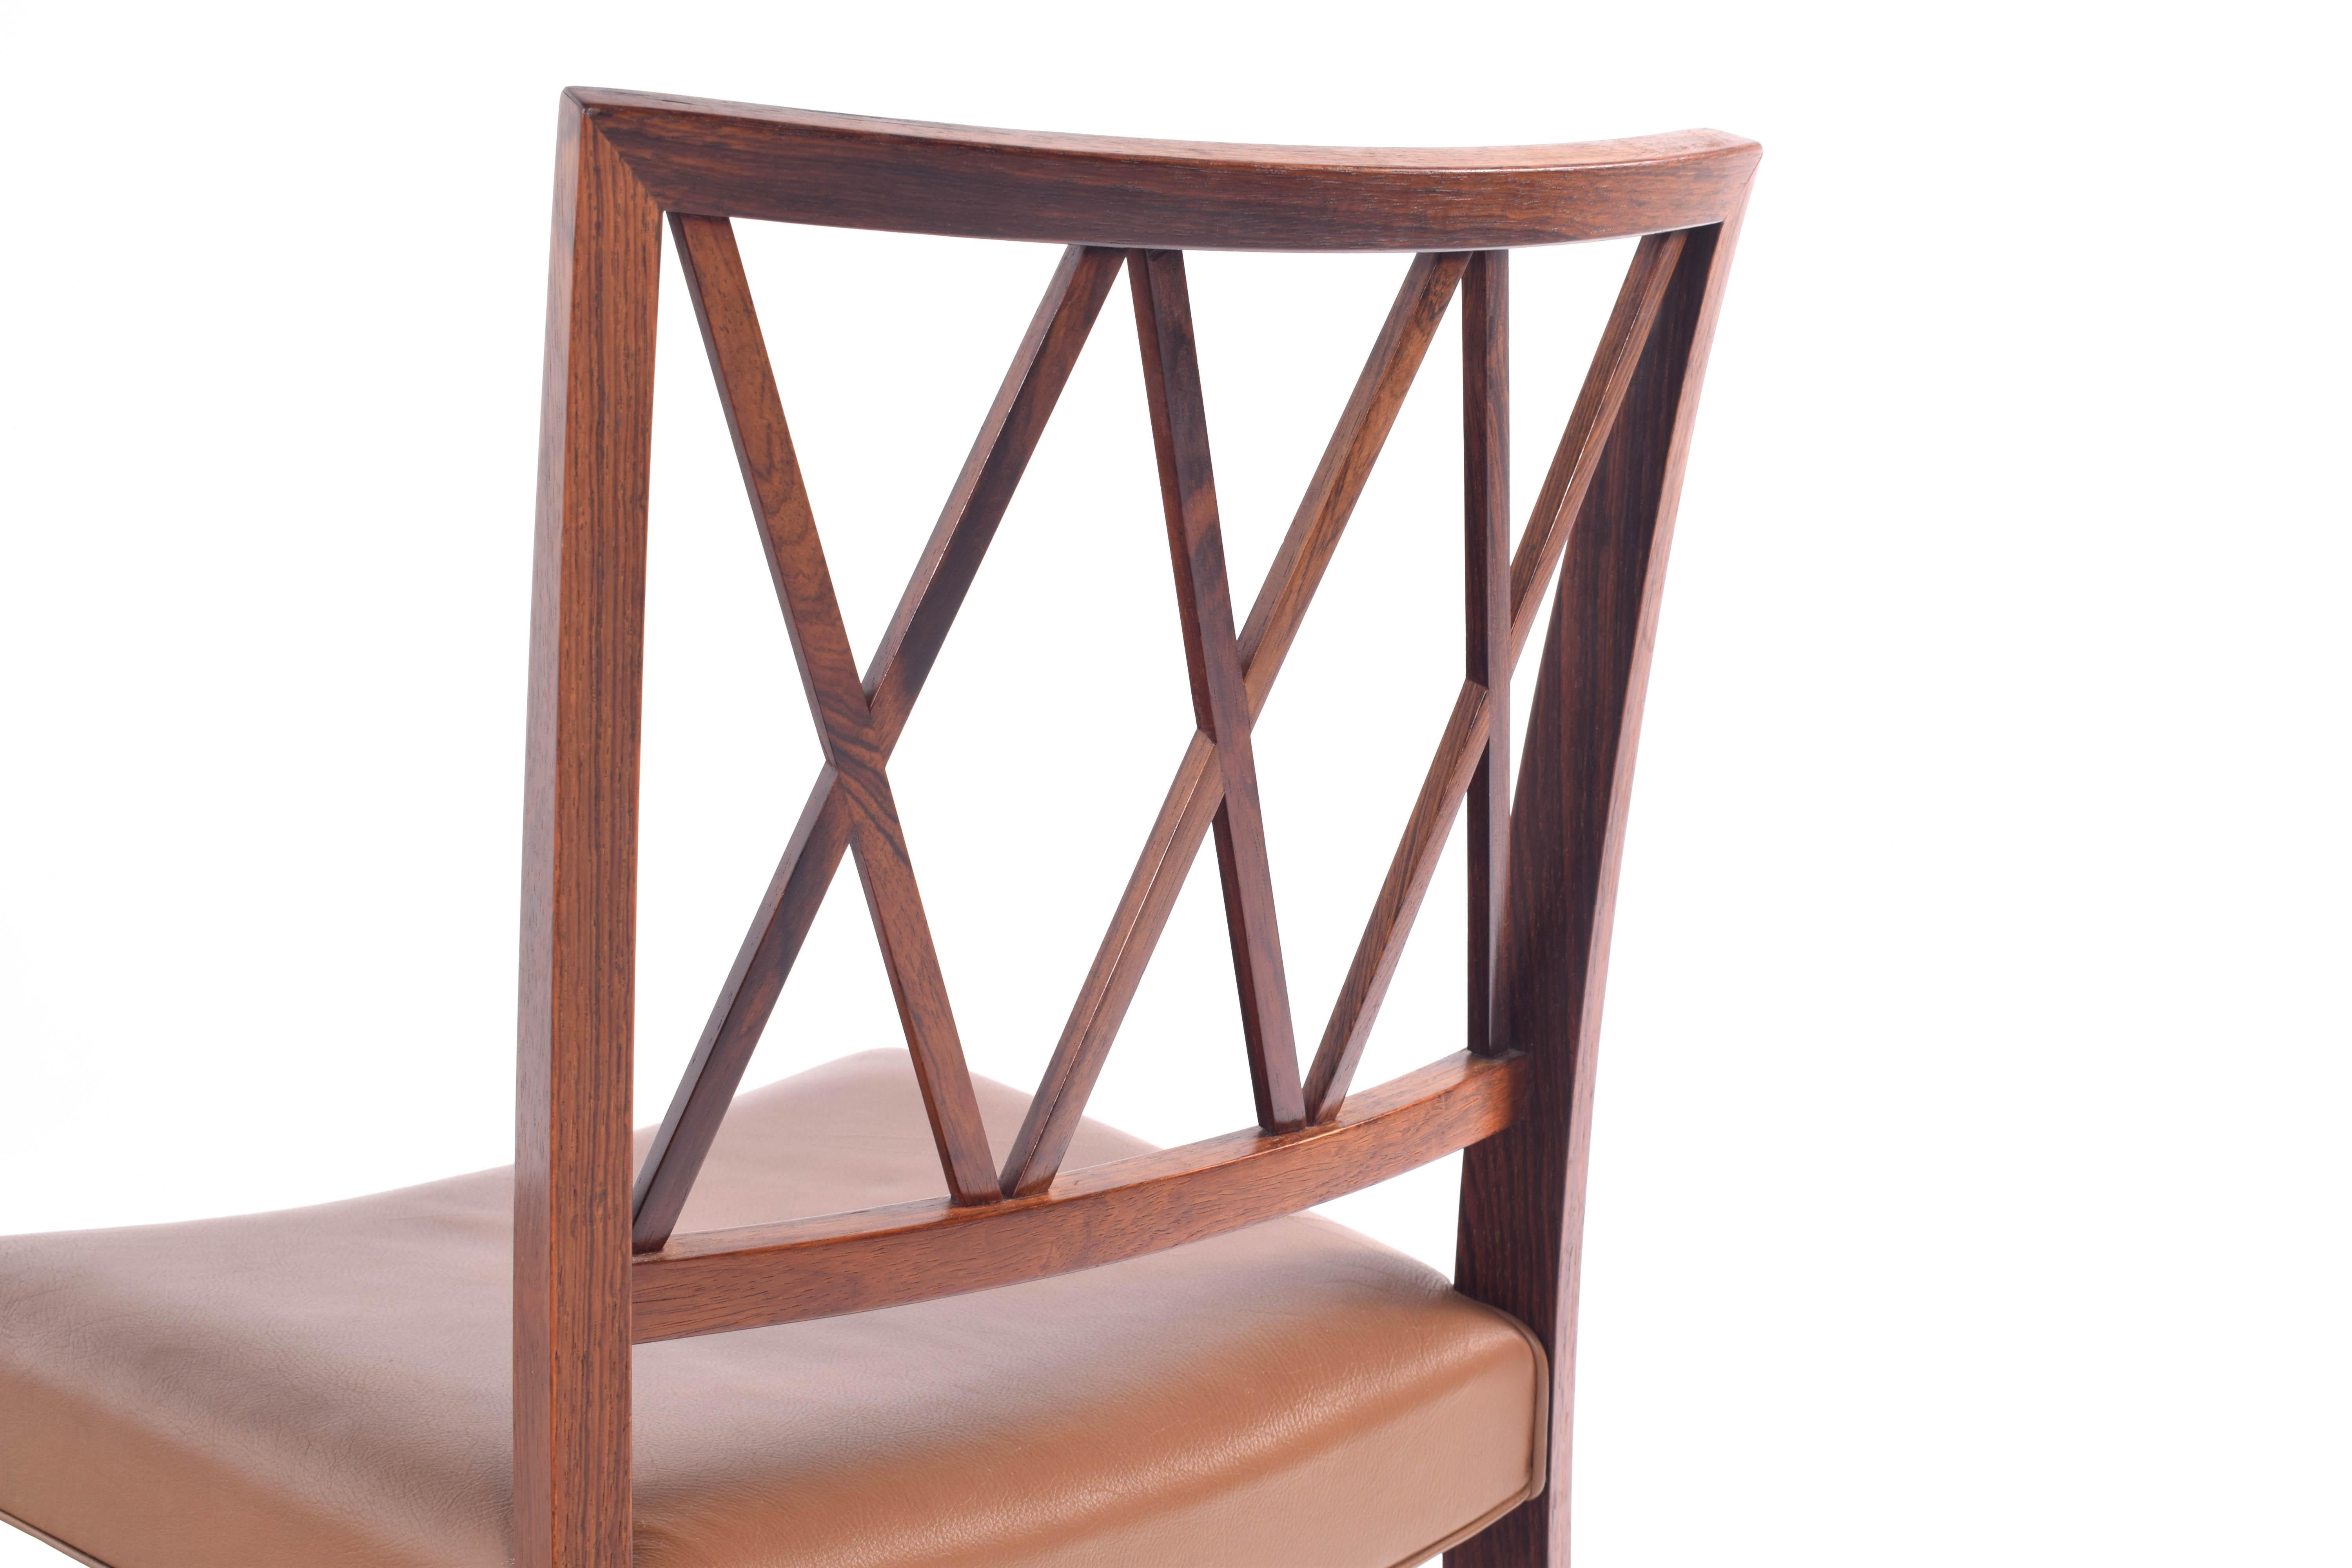 Ole Wanscher Slagelse Rosewood Dining Chairs 6